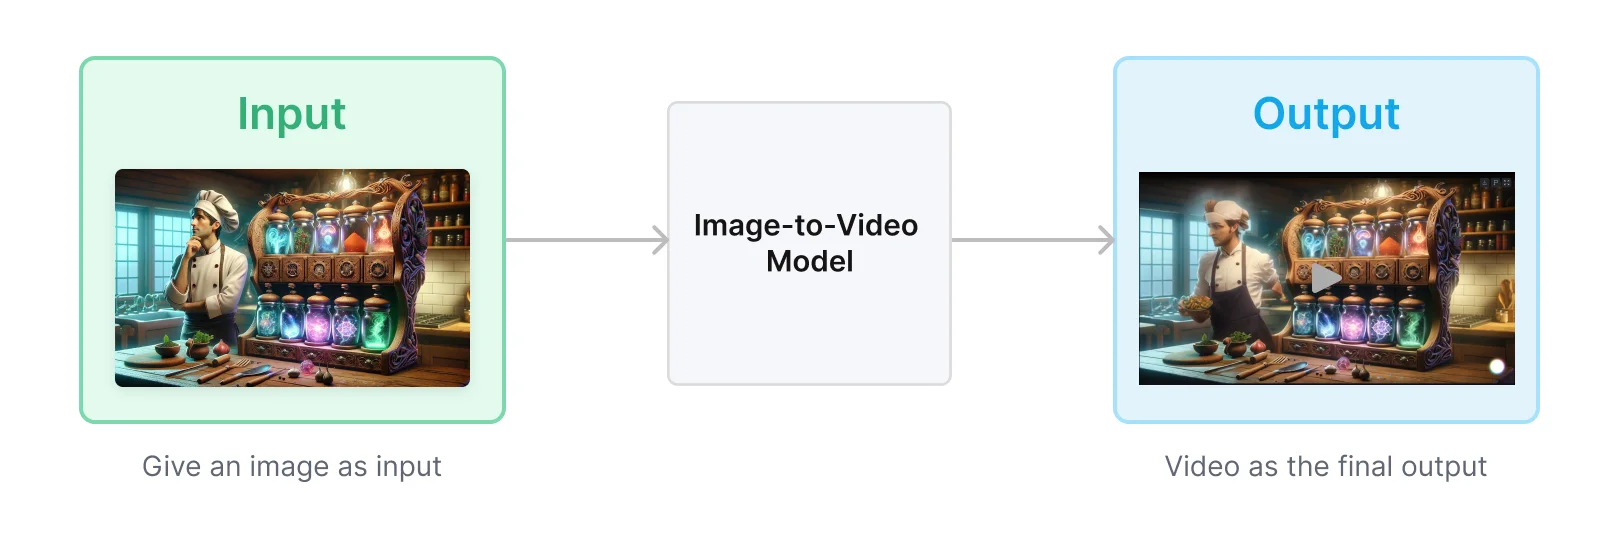 image to video model example